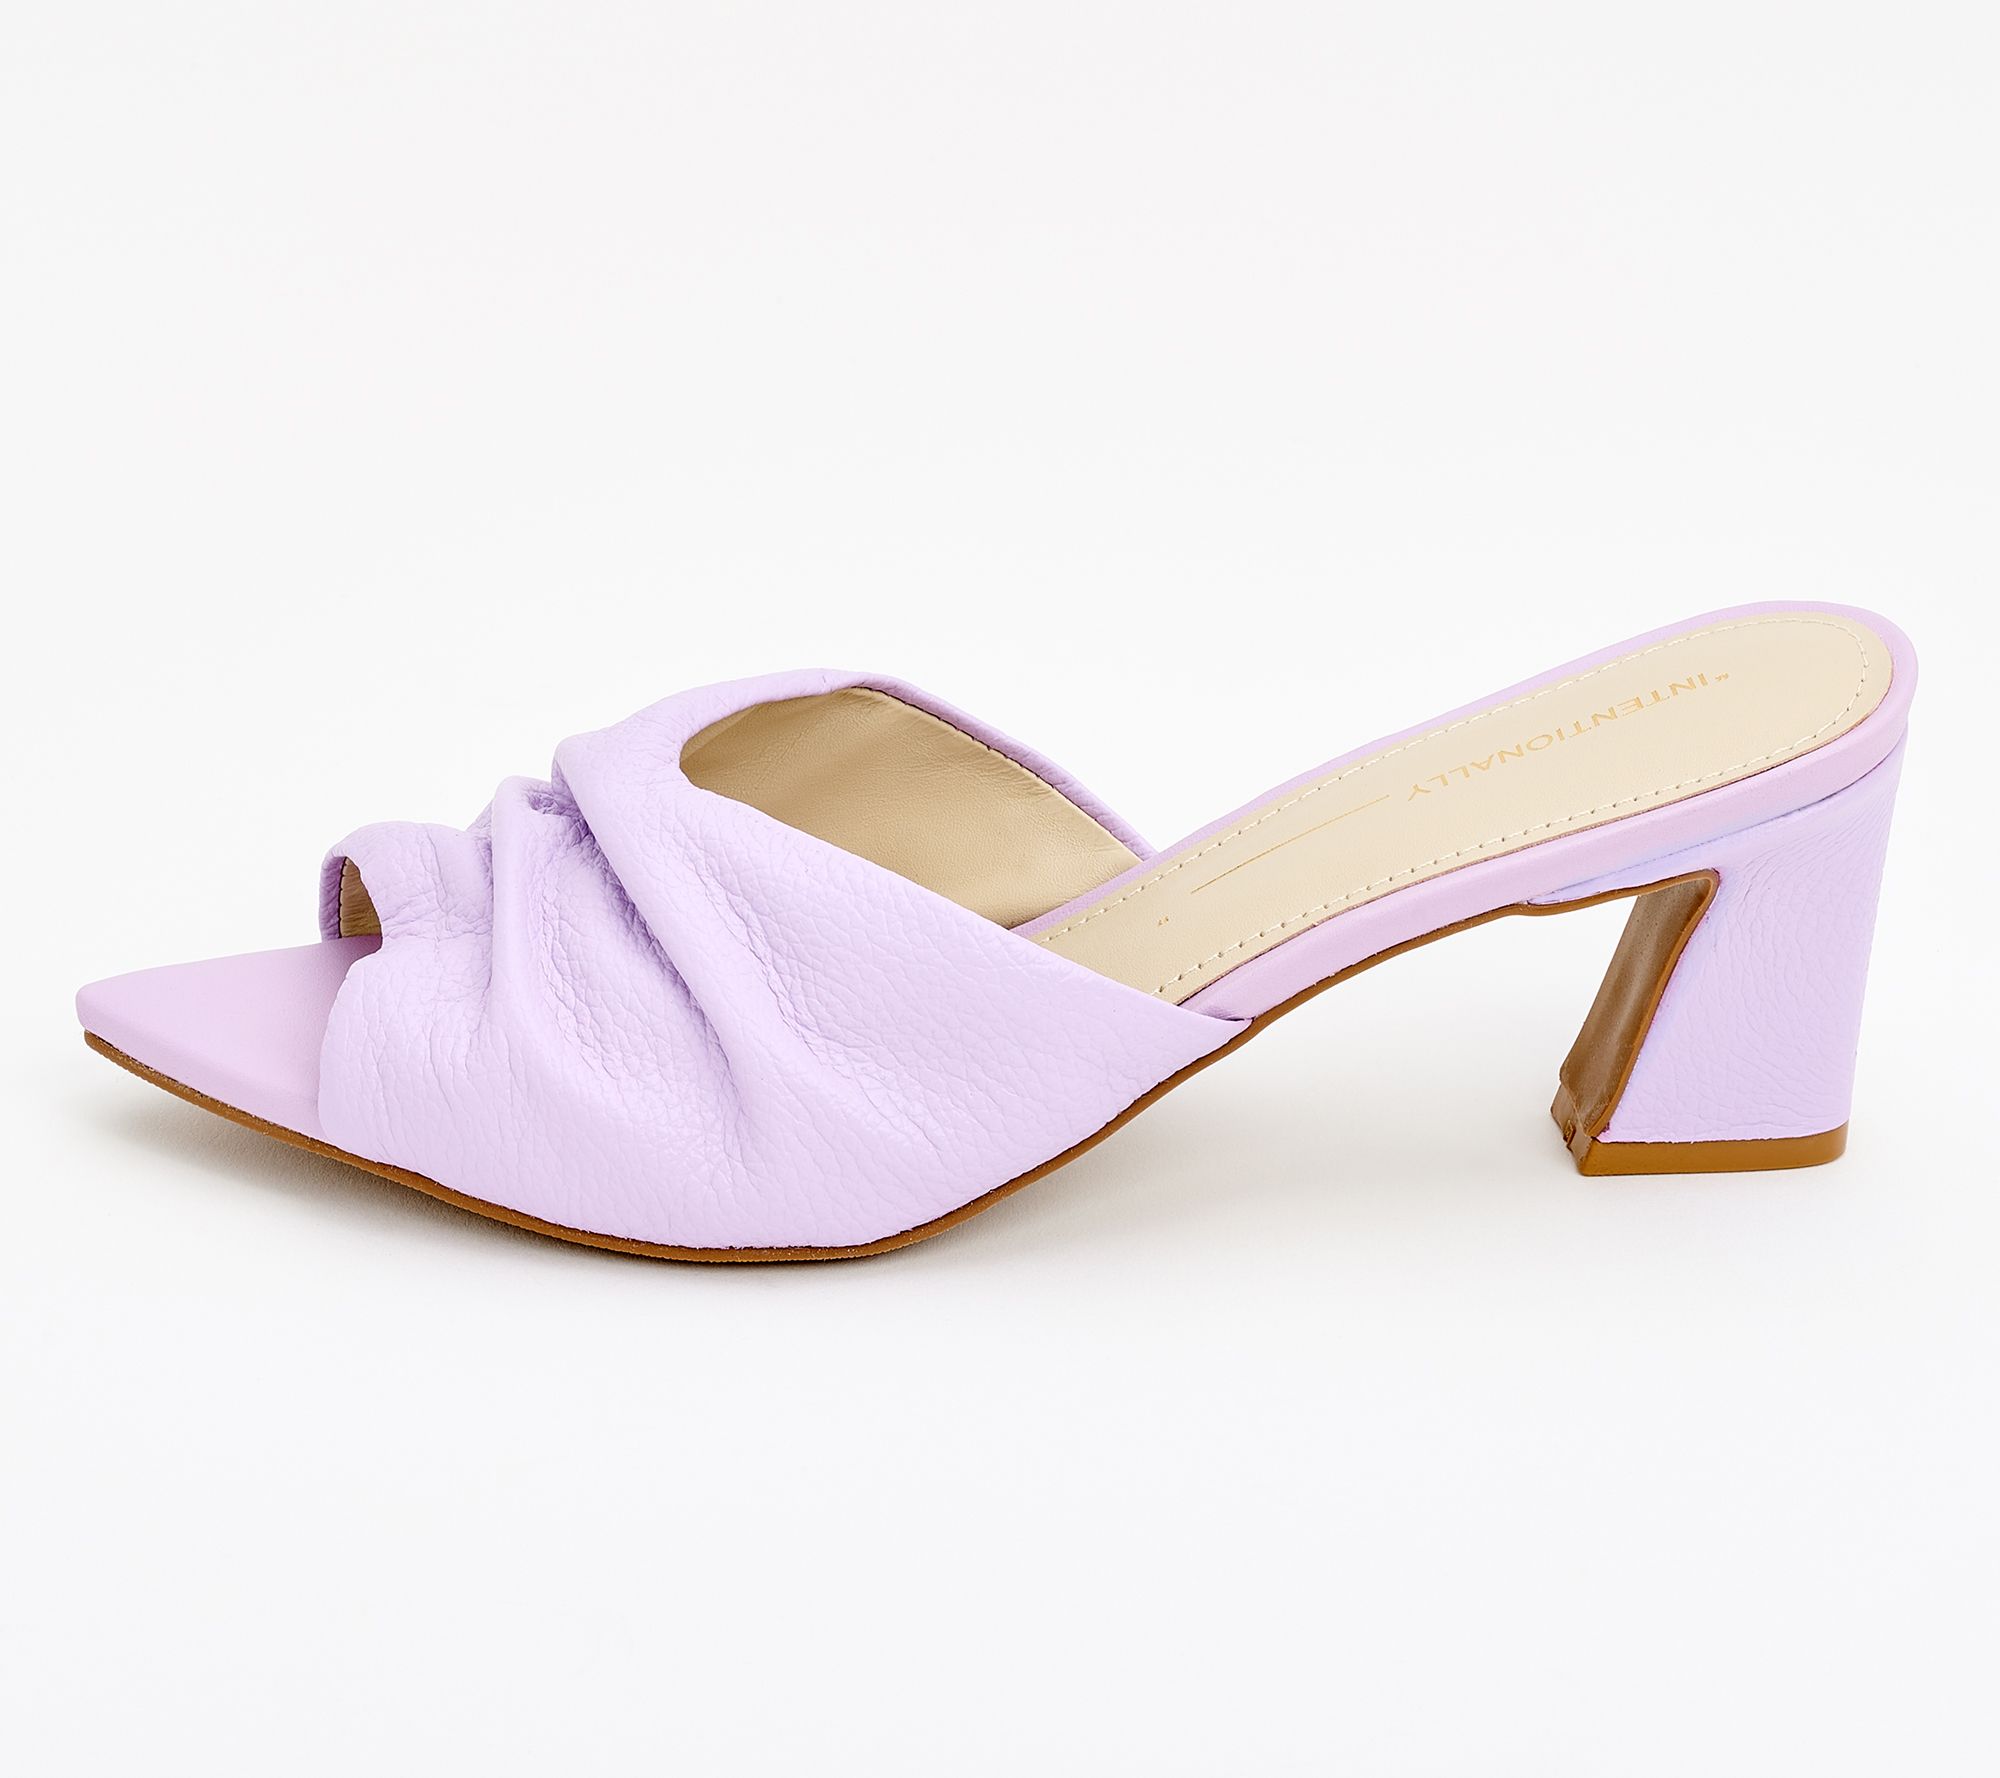 INTENTIONALLY BLANK Leather Pointed Toe Mule Sandals - Fair - QVC.com